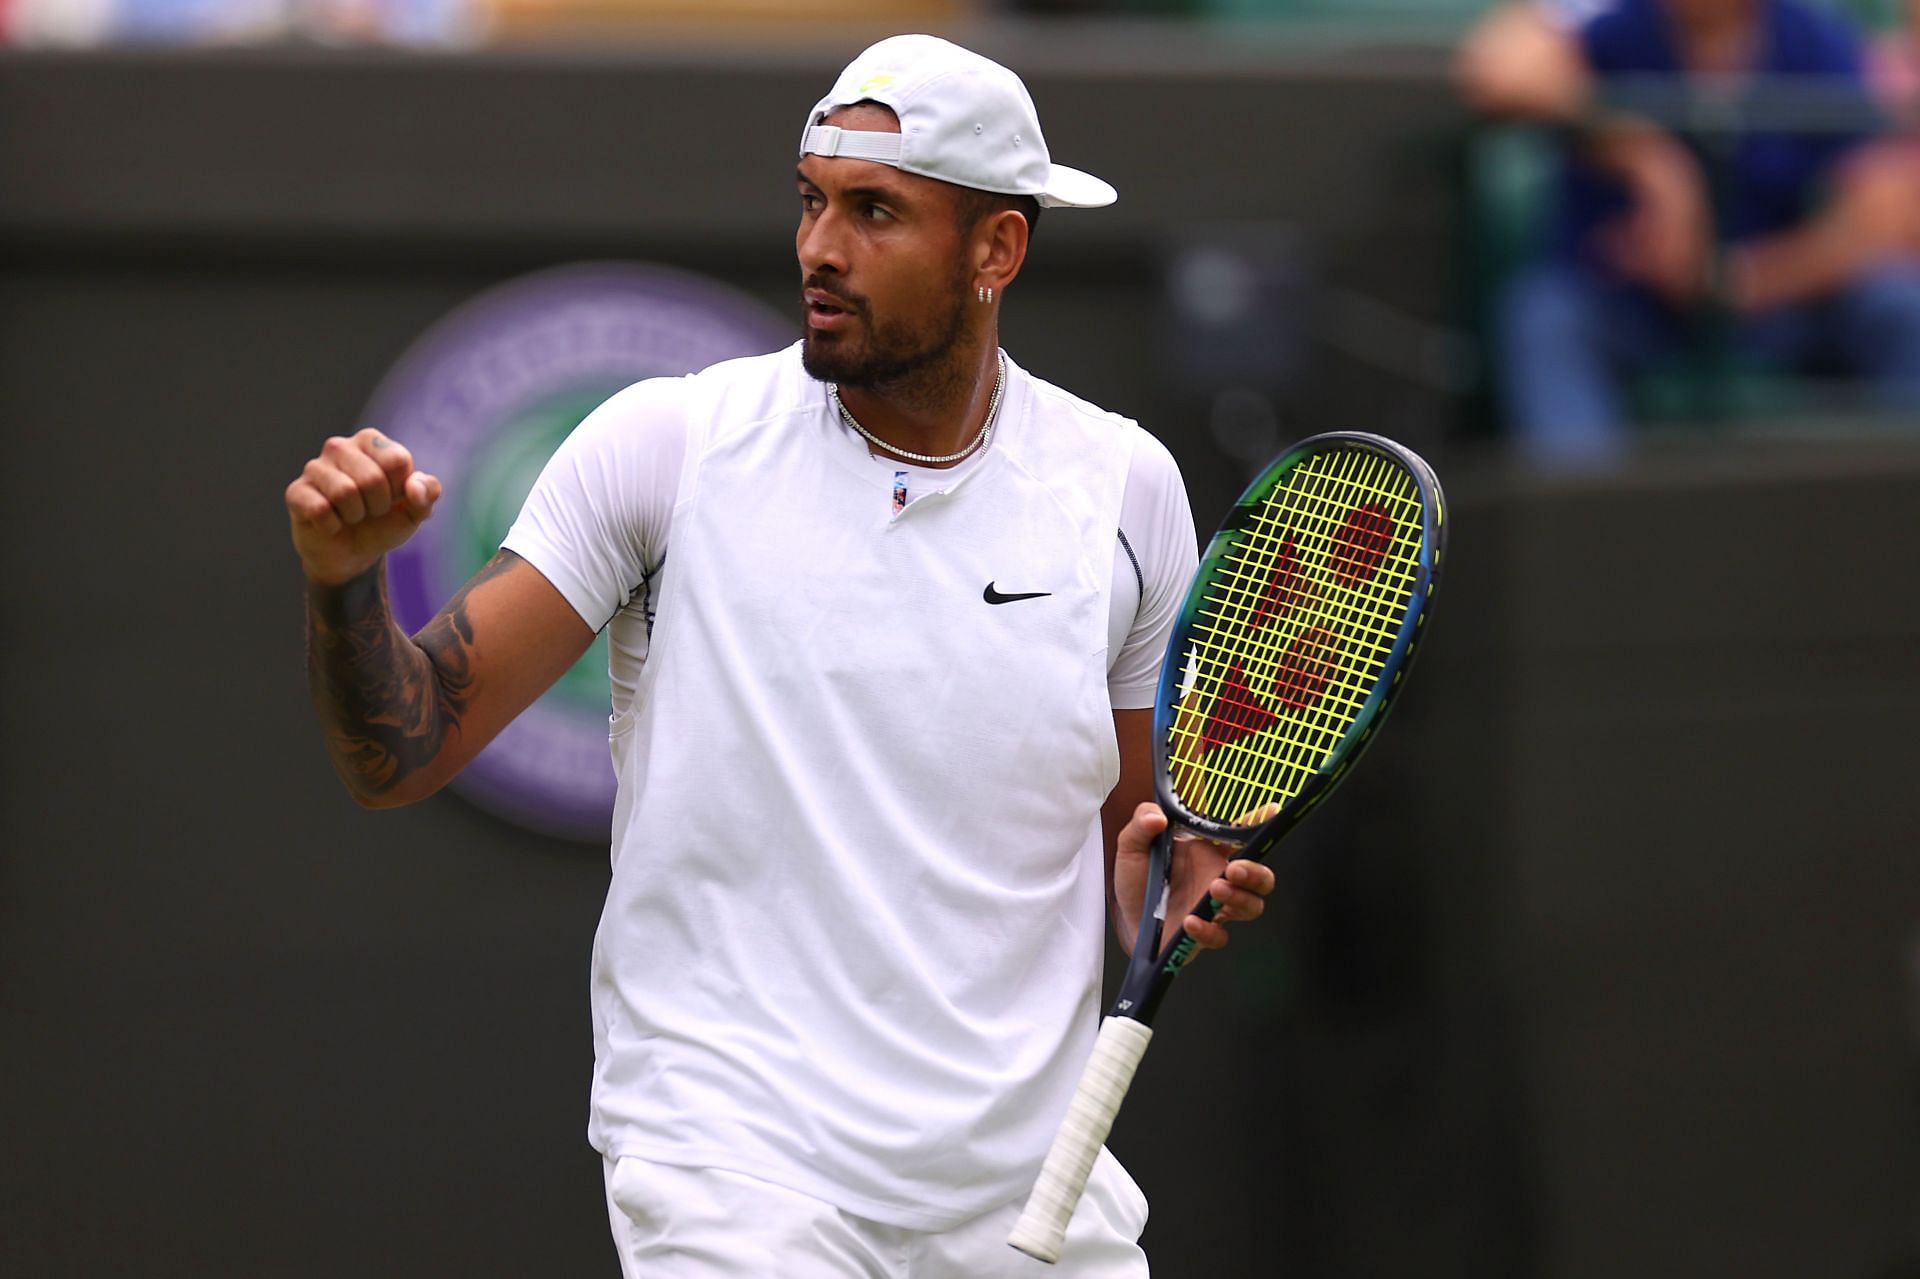 Nick Kyrgios in action at the 2022 Wimbledon Championships.